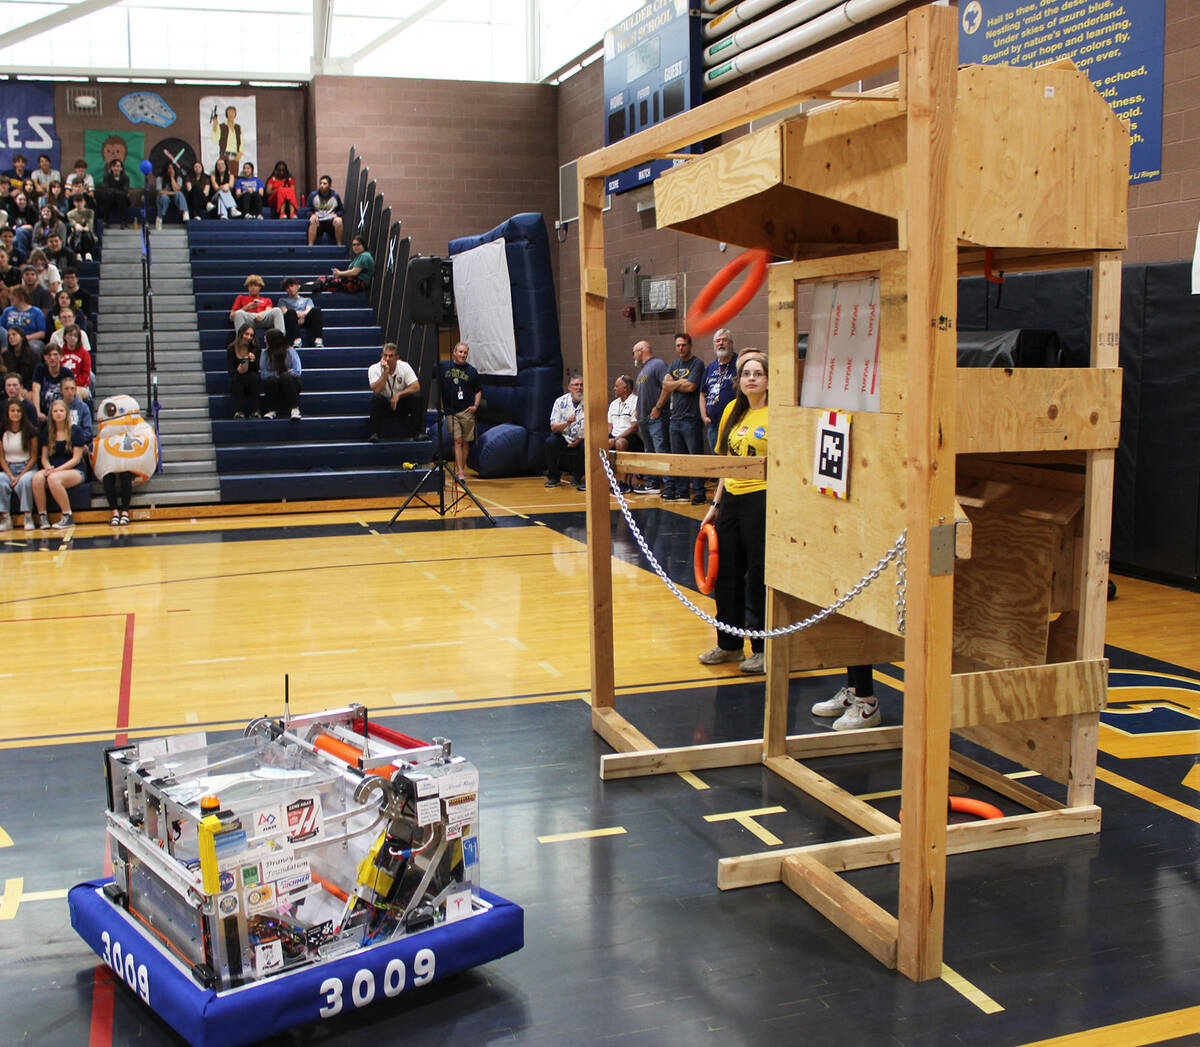 The BCHS robotics team displayed their award-winning robot Friday as it not only picked up plas ...